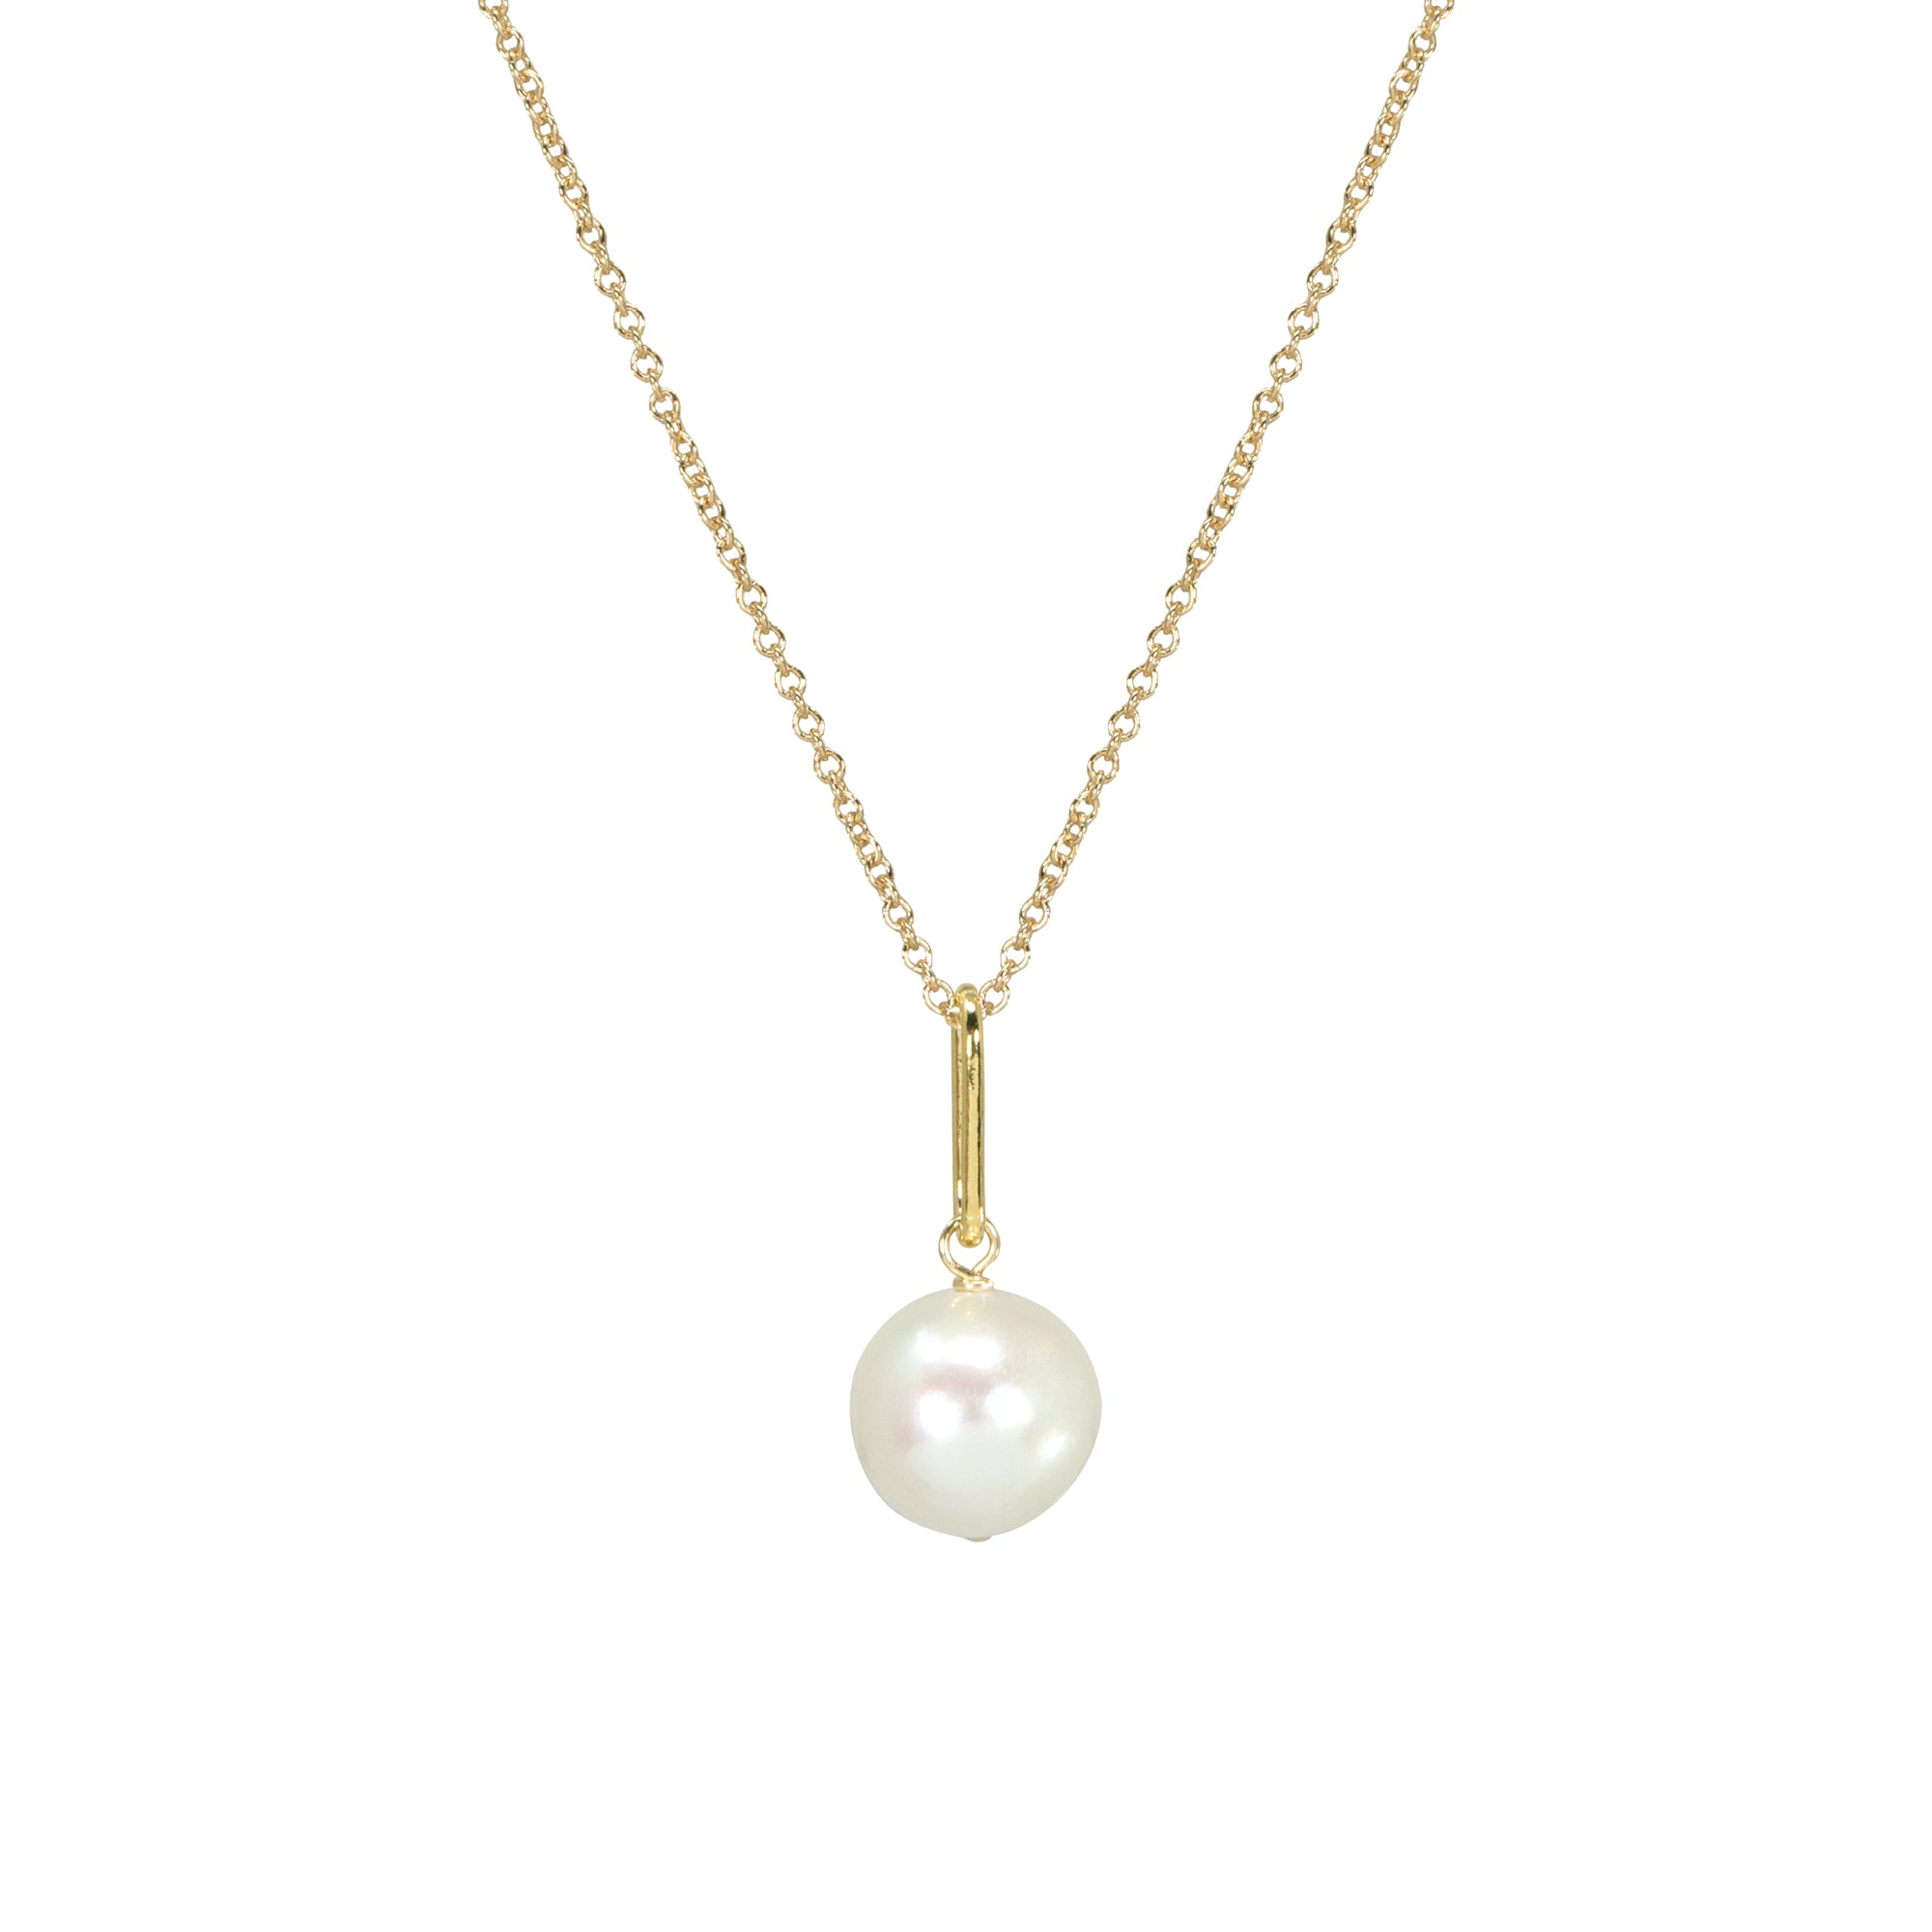 June birthstone freshwater pearl necklace